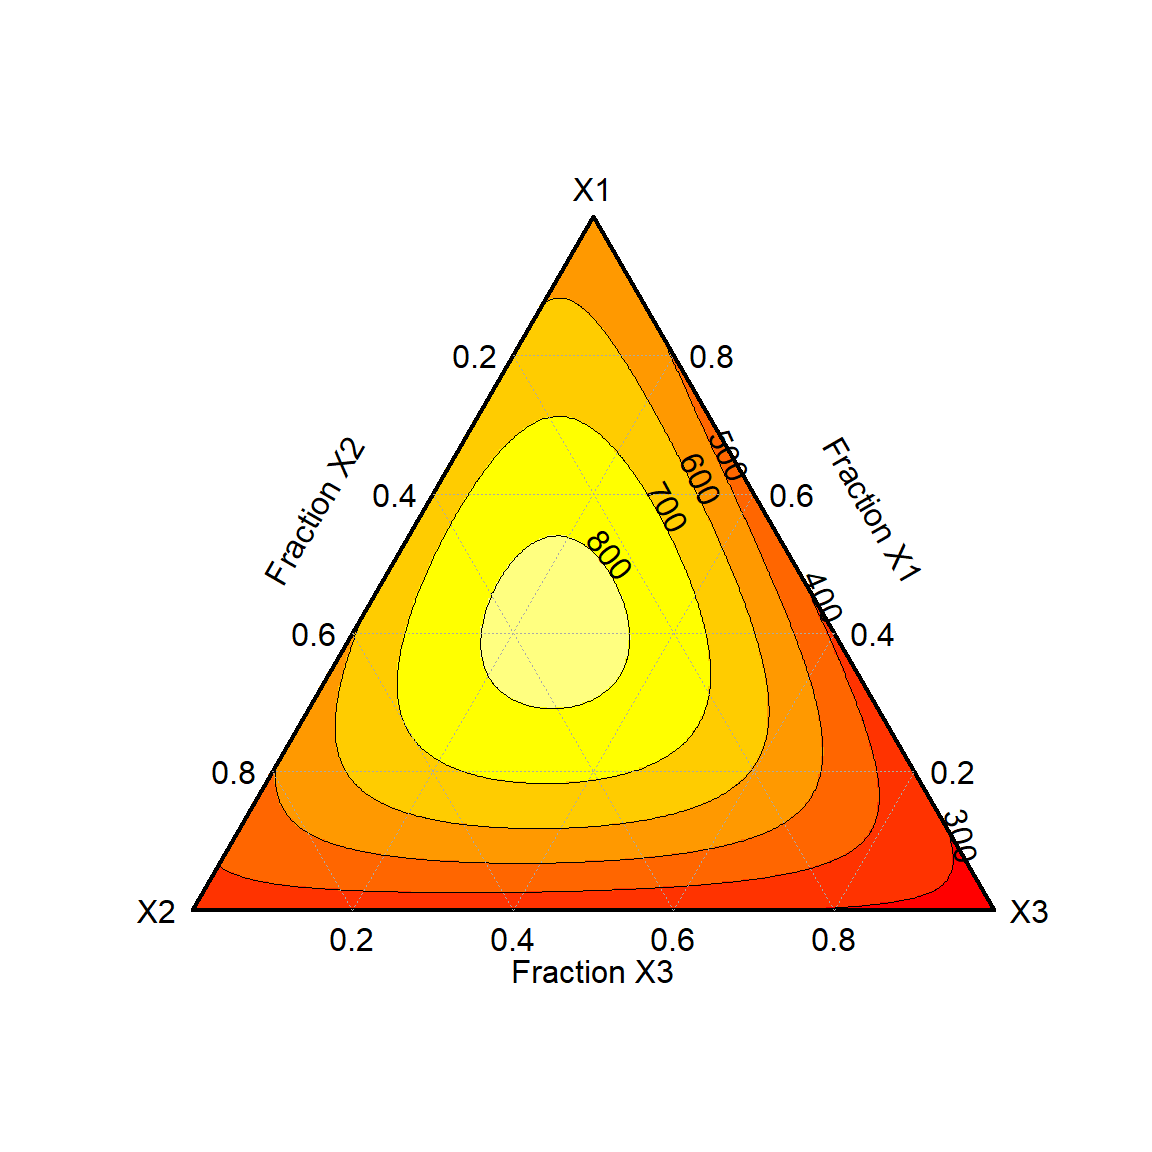 Contour plot of the reduced cubic model of the etching data